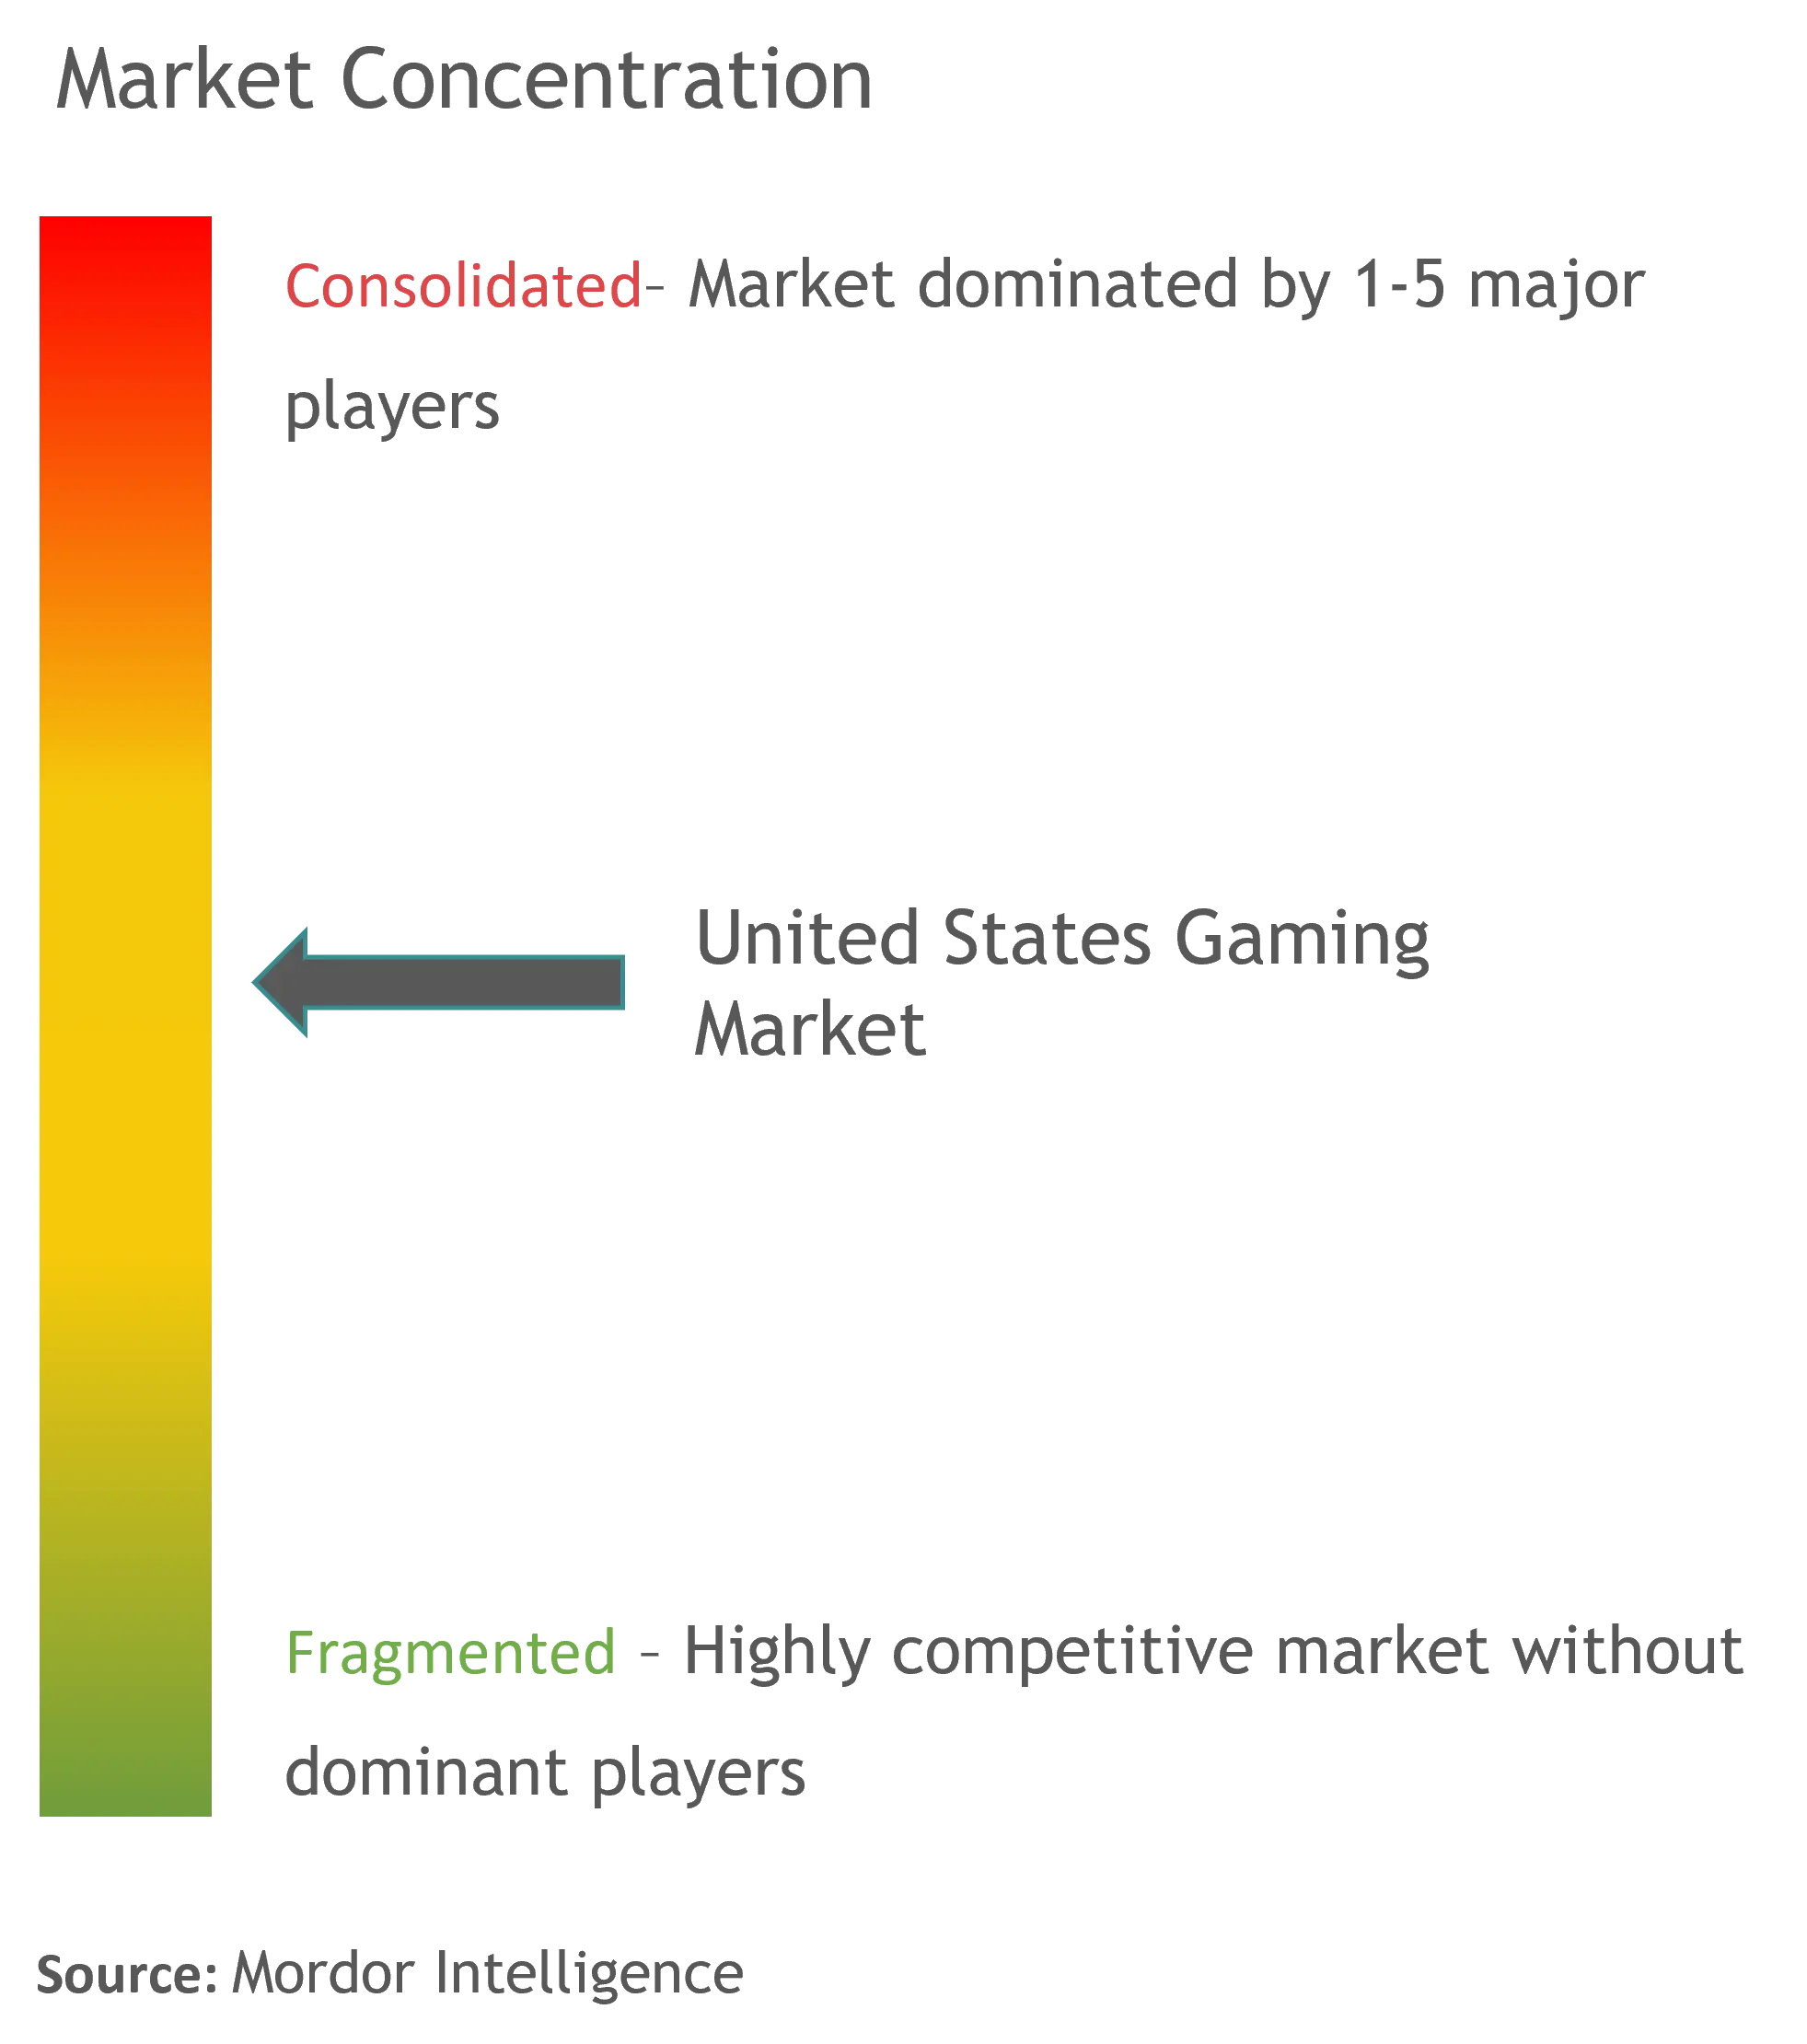 United States Gaming Market Concentration